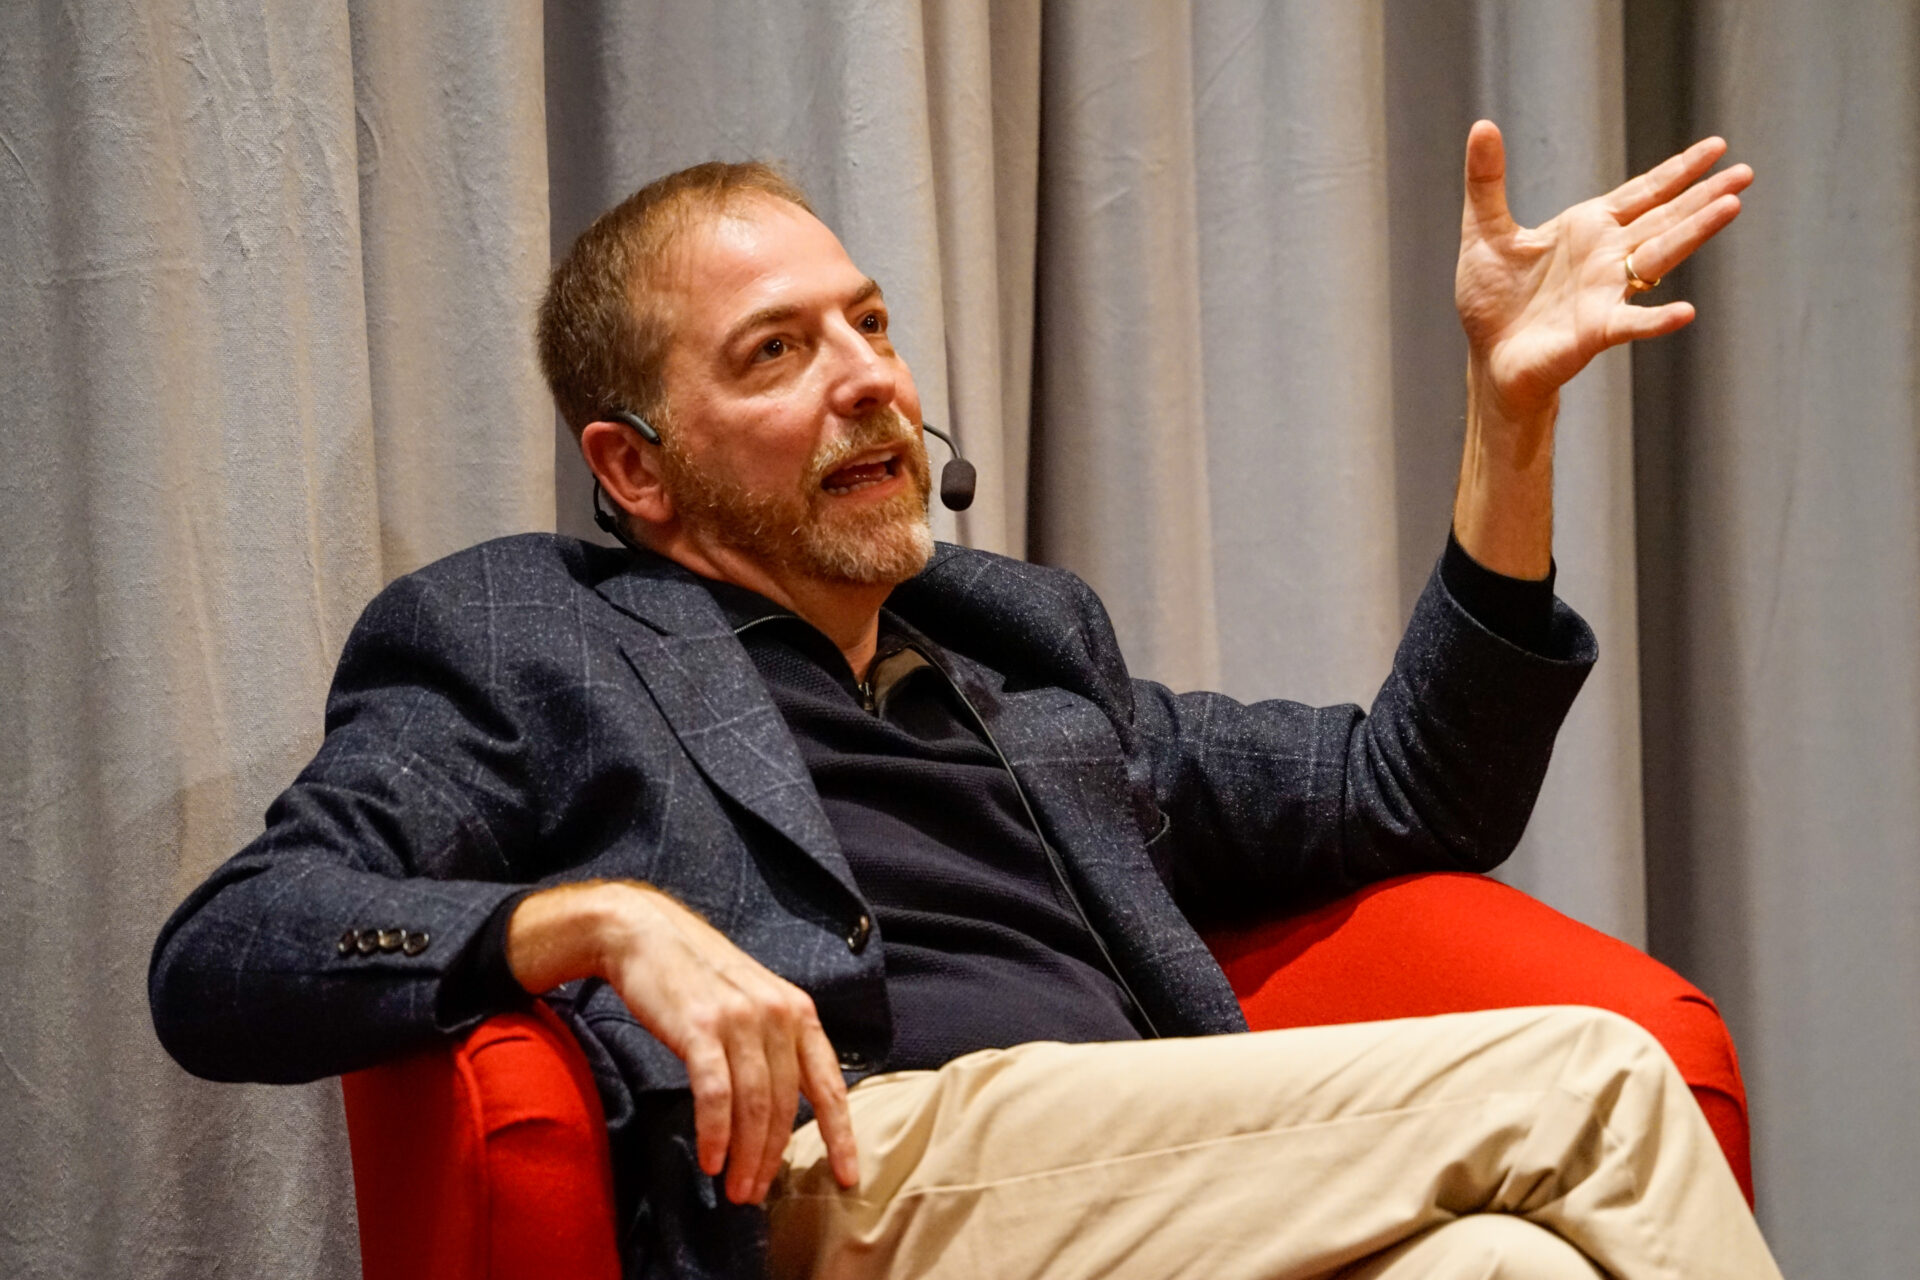 Former moderator of Meet the Press Chuck Todd Visits Ole Miss  